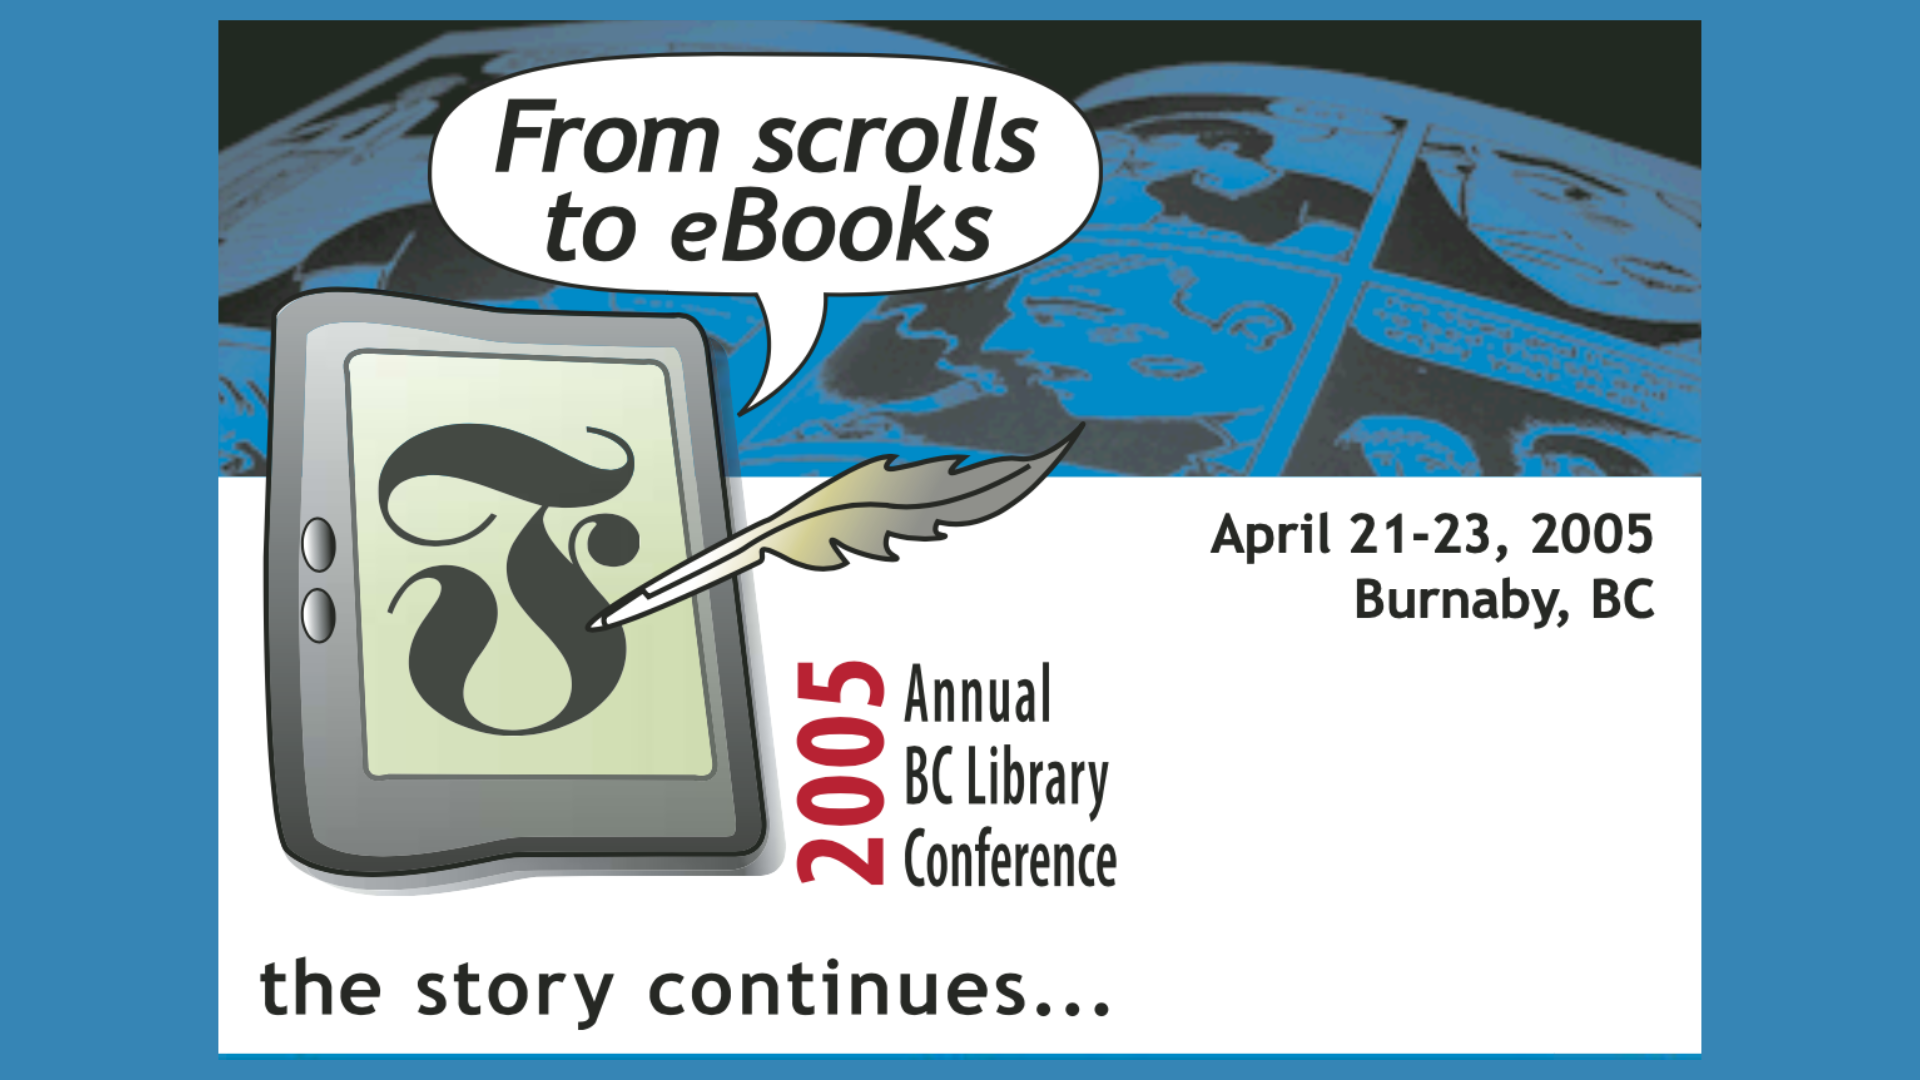 Graphic with text "From Scrolls to eBooks the story continues... 2005 Annual BC Library Conference April 21-23,2005 Burnaby, BC"